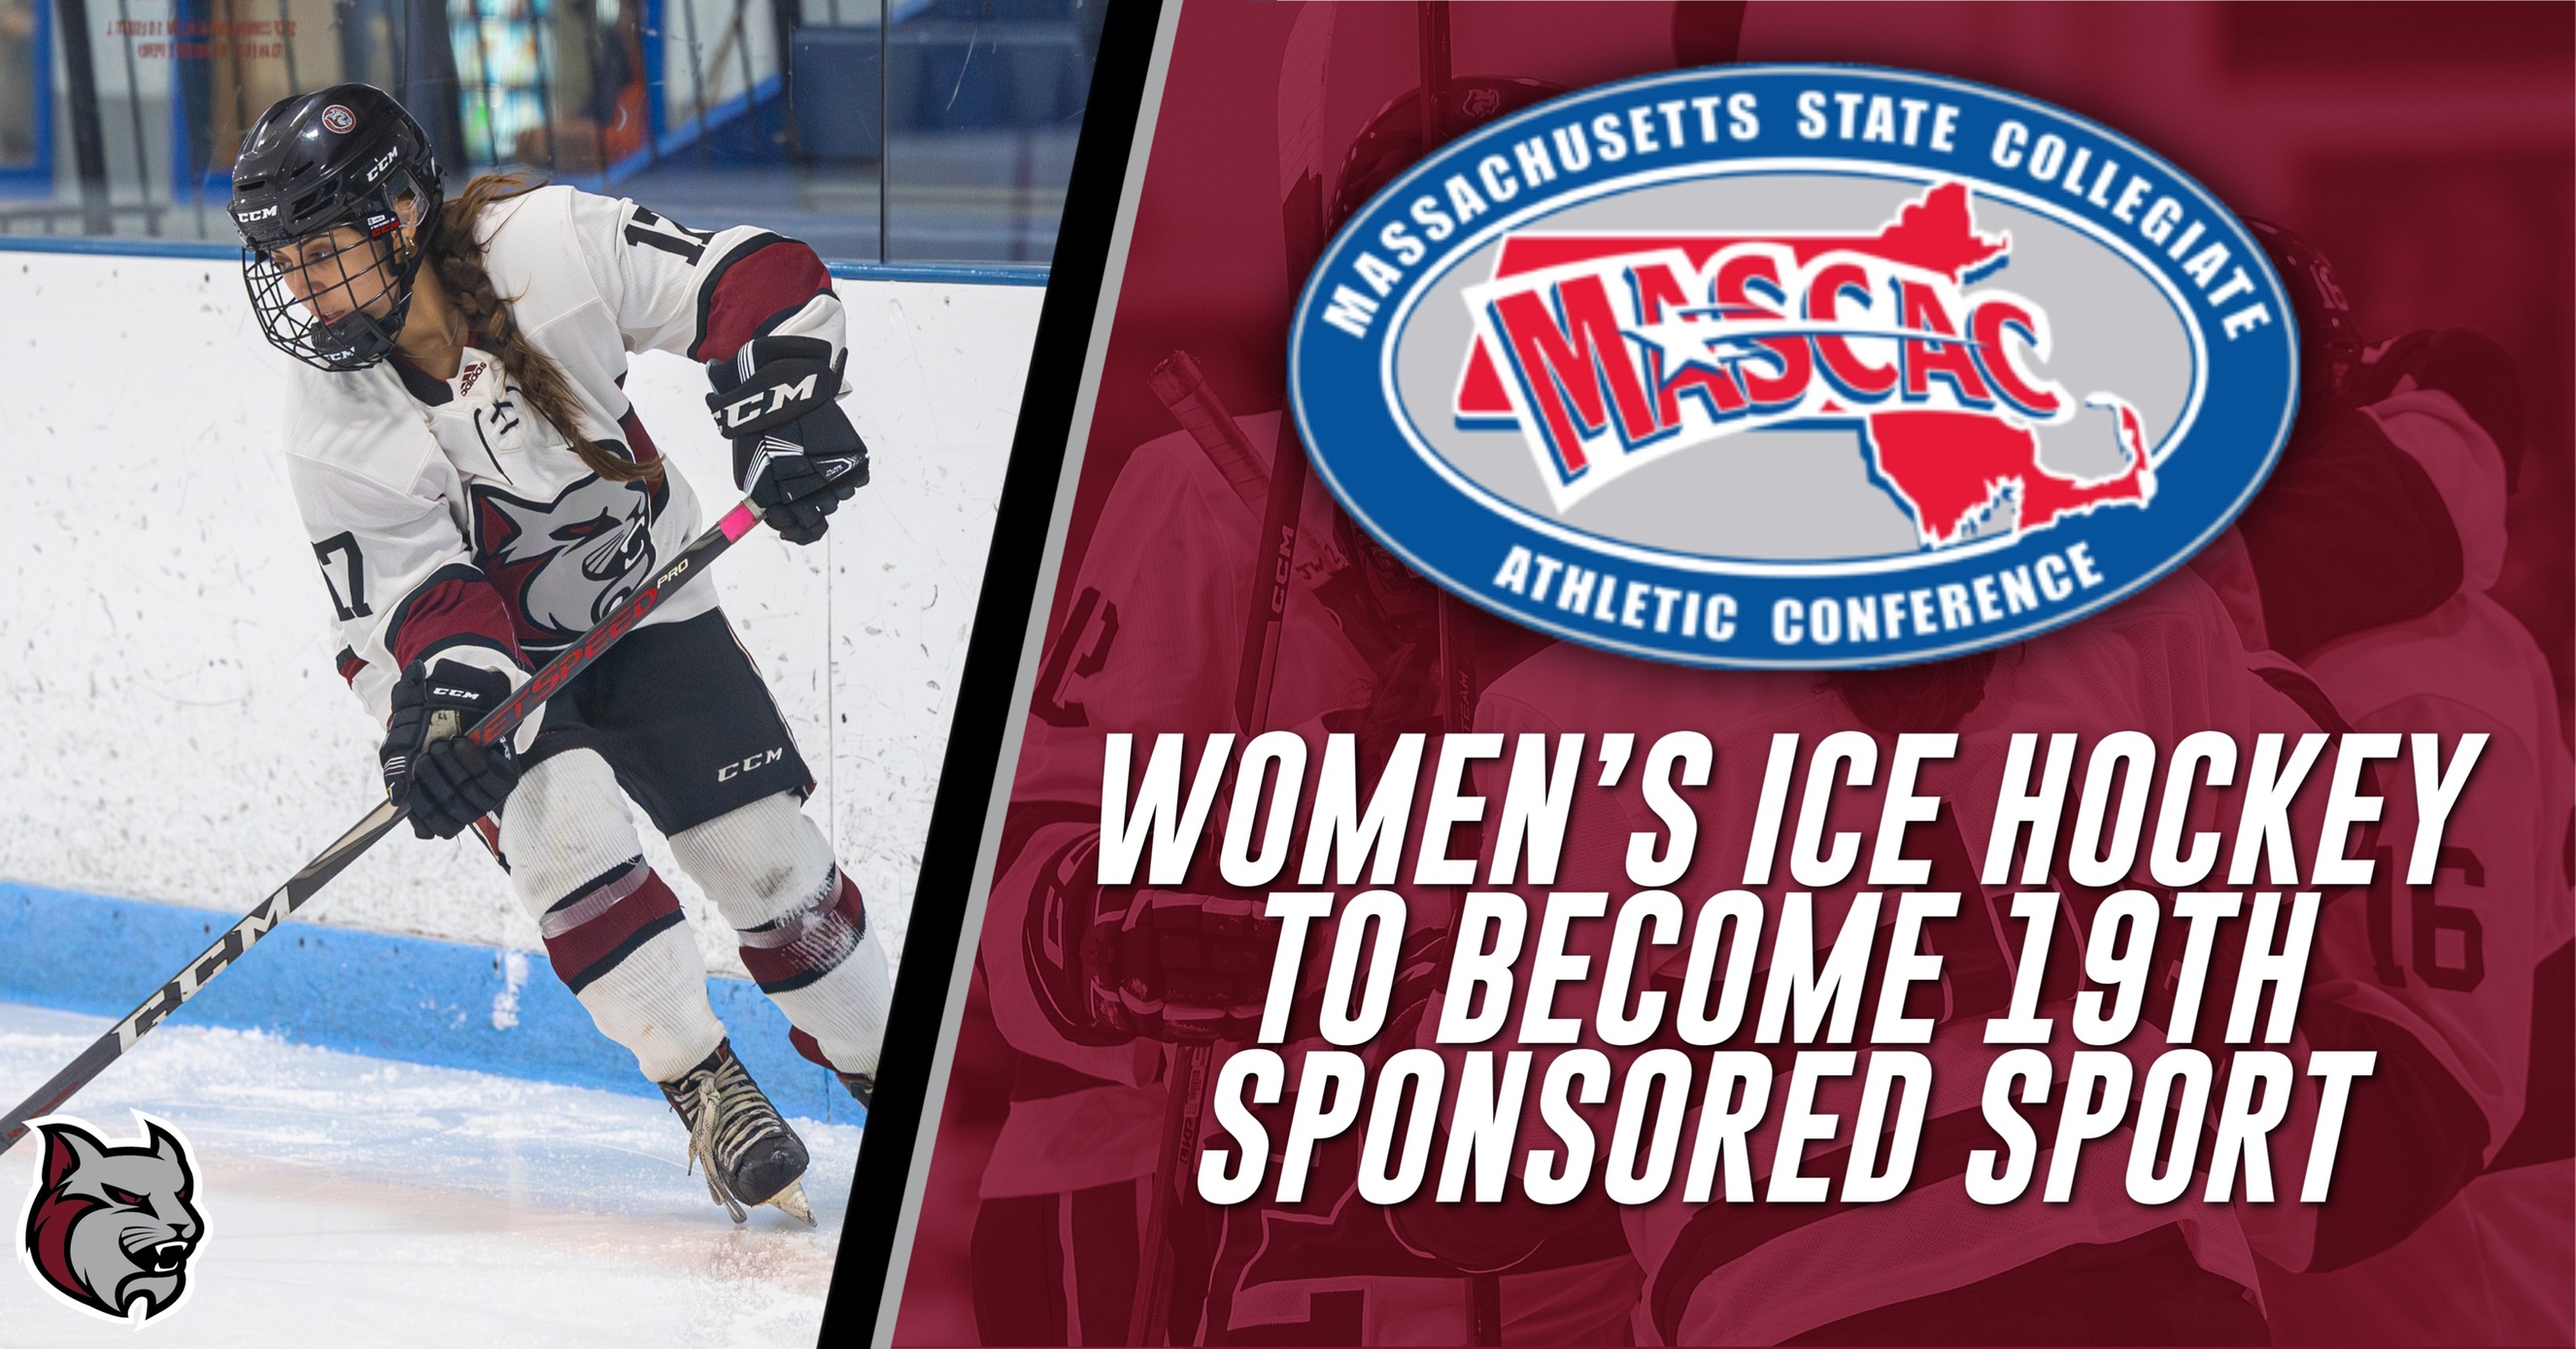 MASCAC Women’s Ice Hockey to Become 19th Sponsored Sport